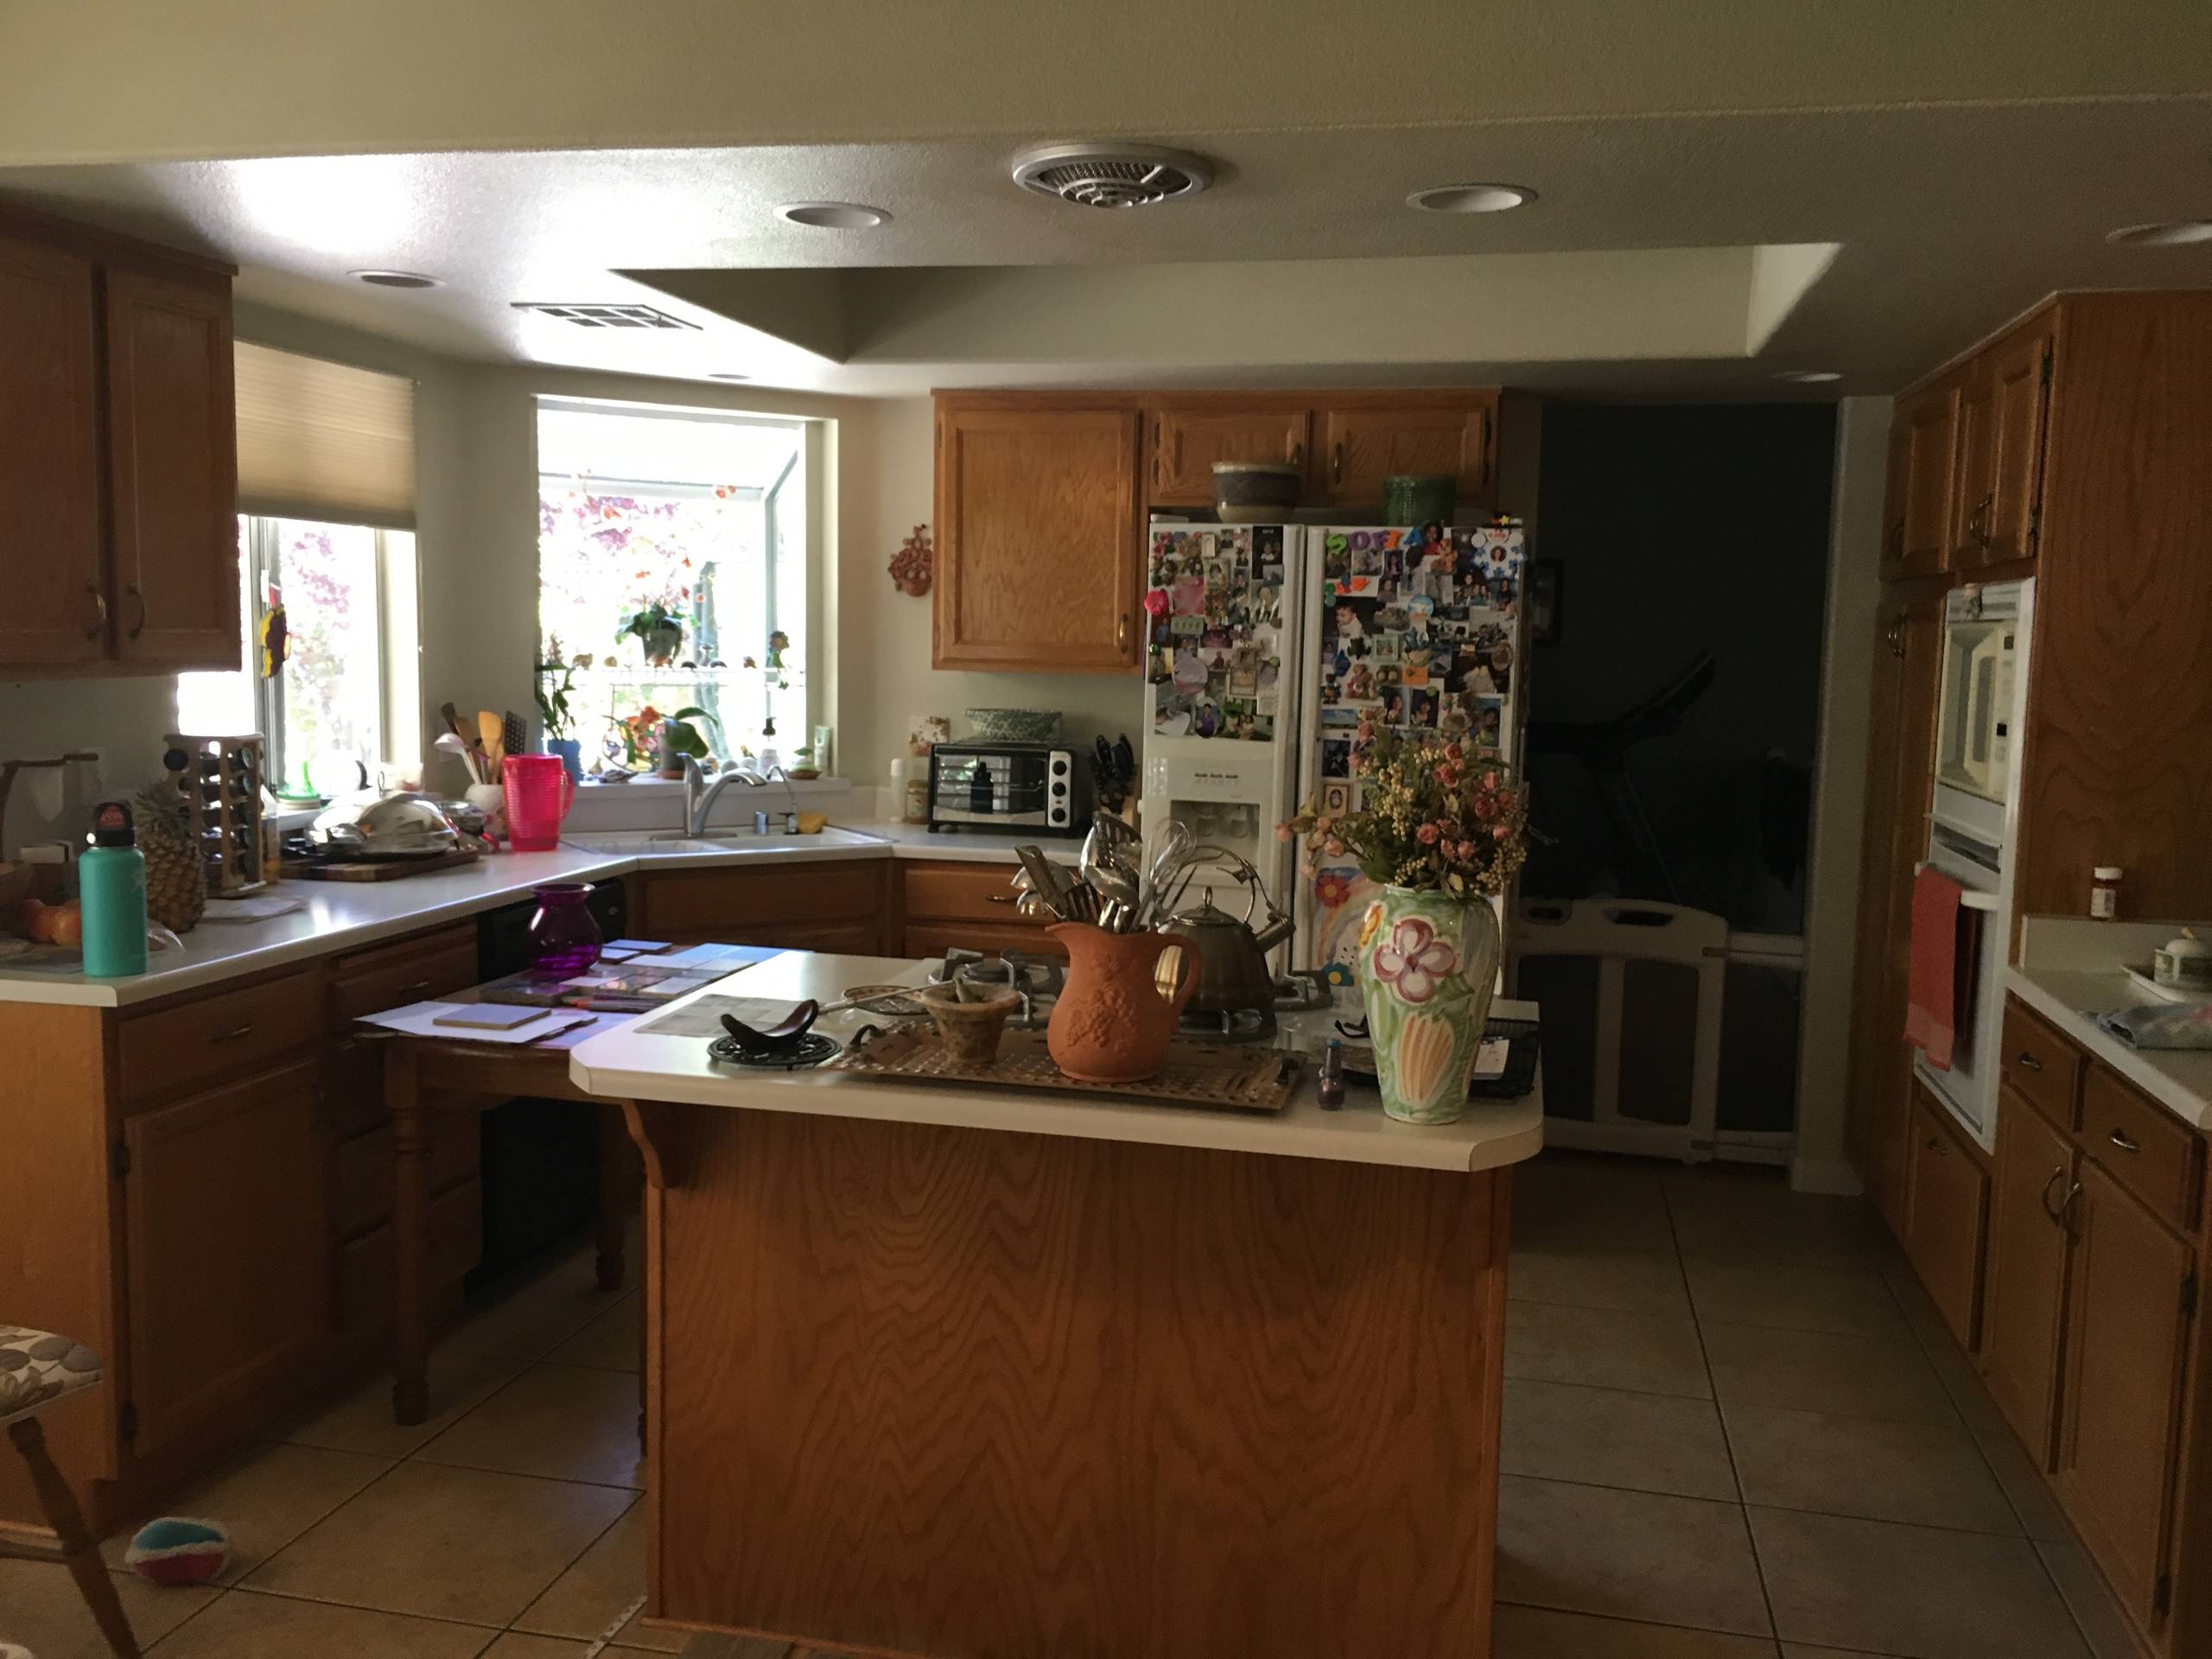 Summerlin Kitchen and Dining Room Renovation Project